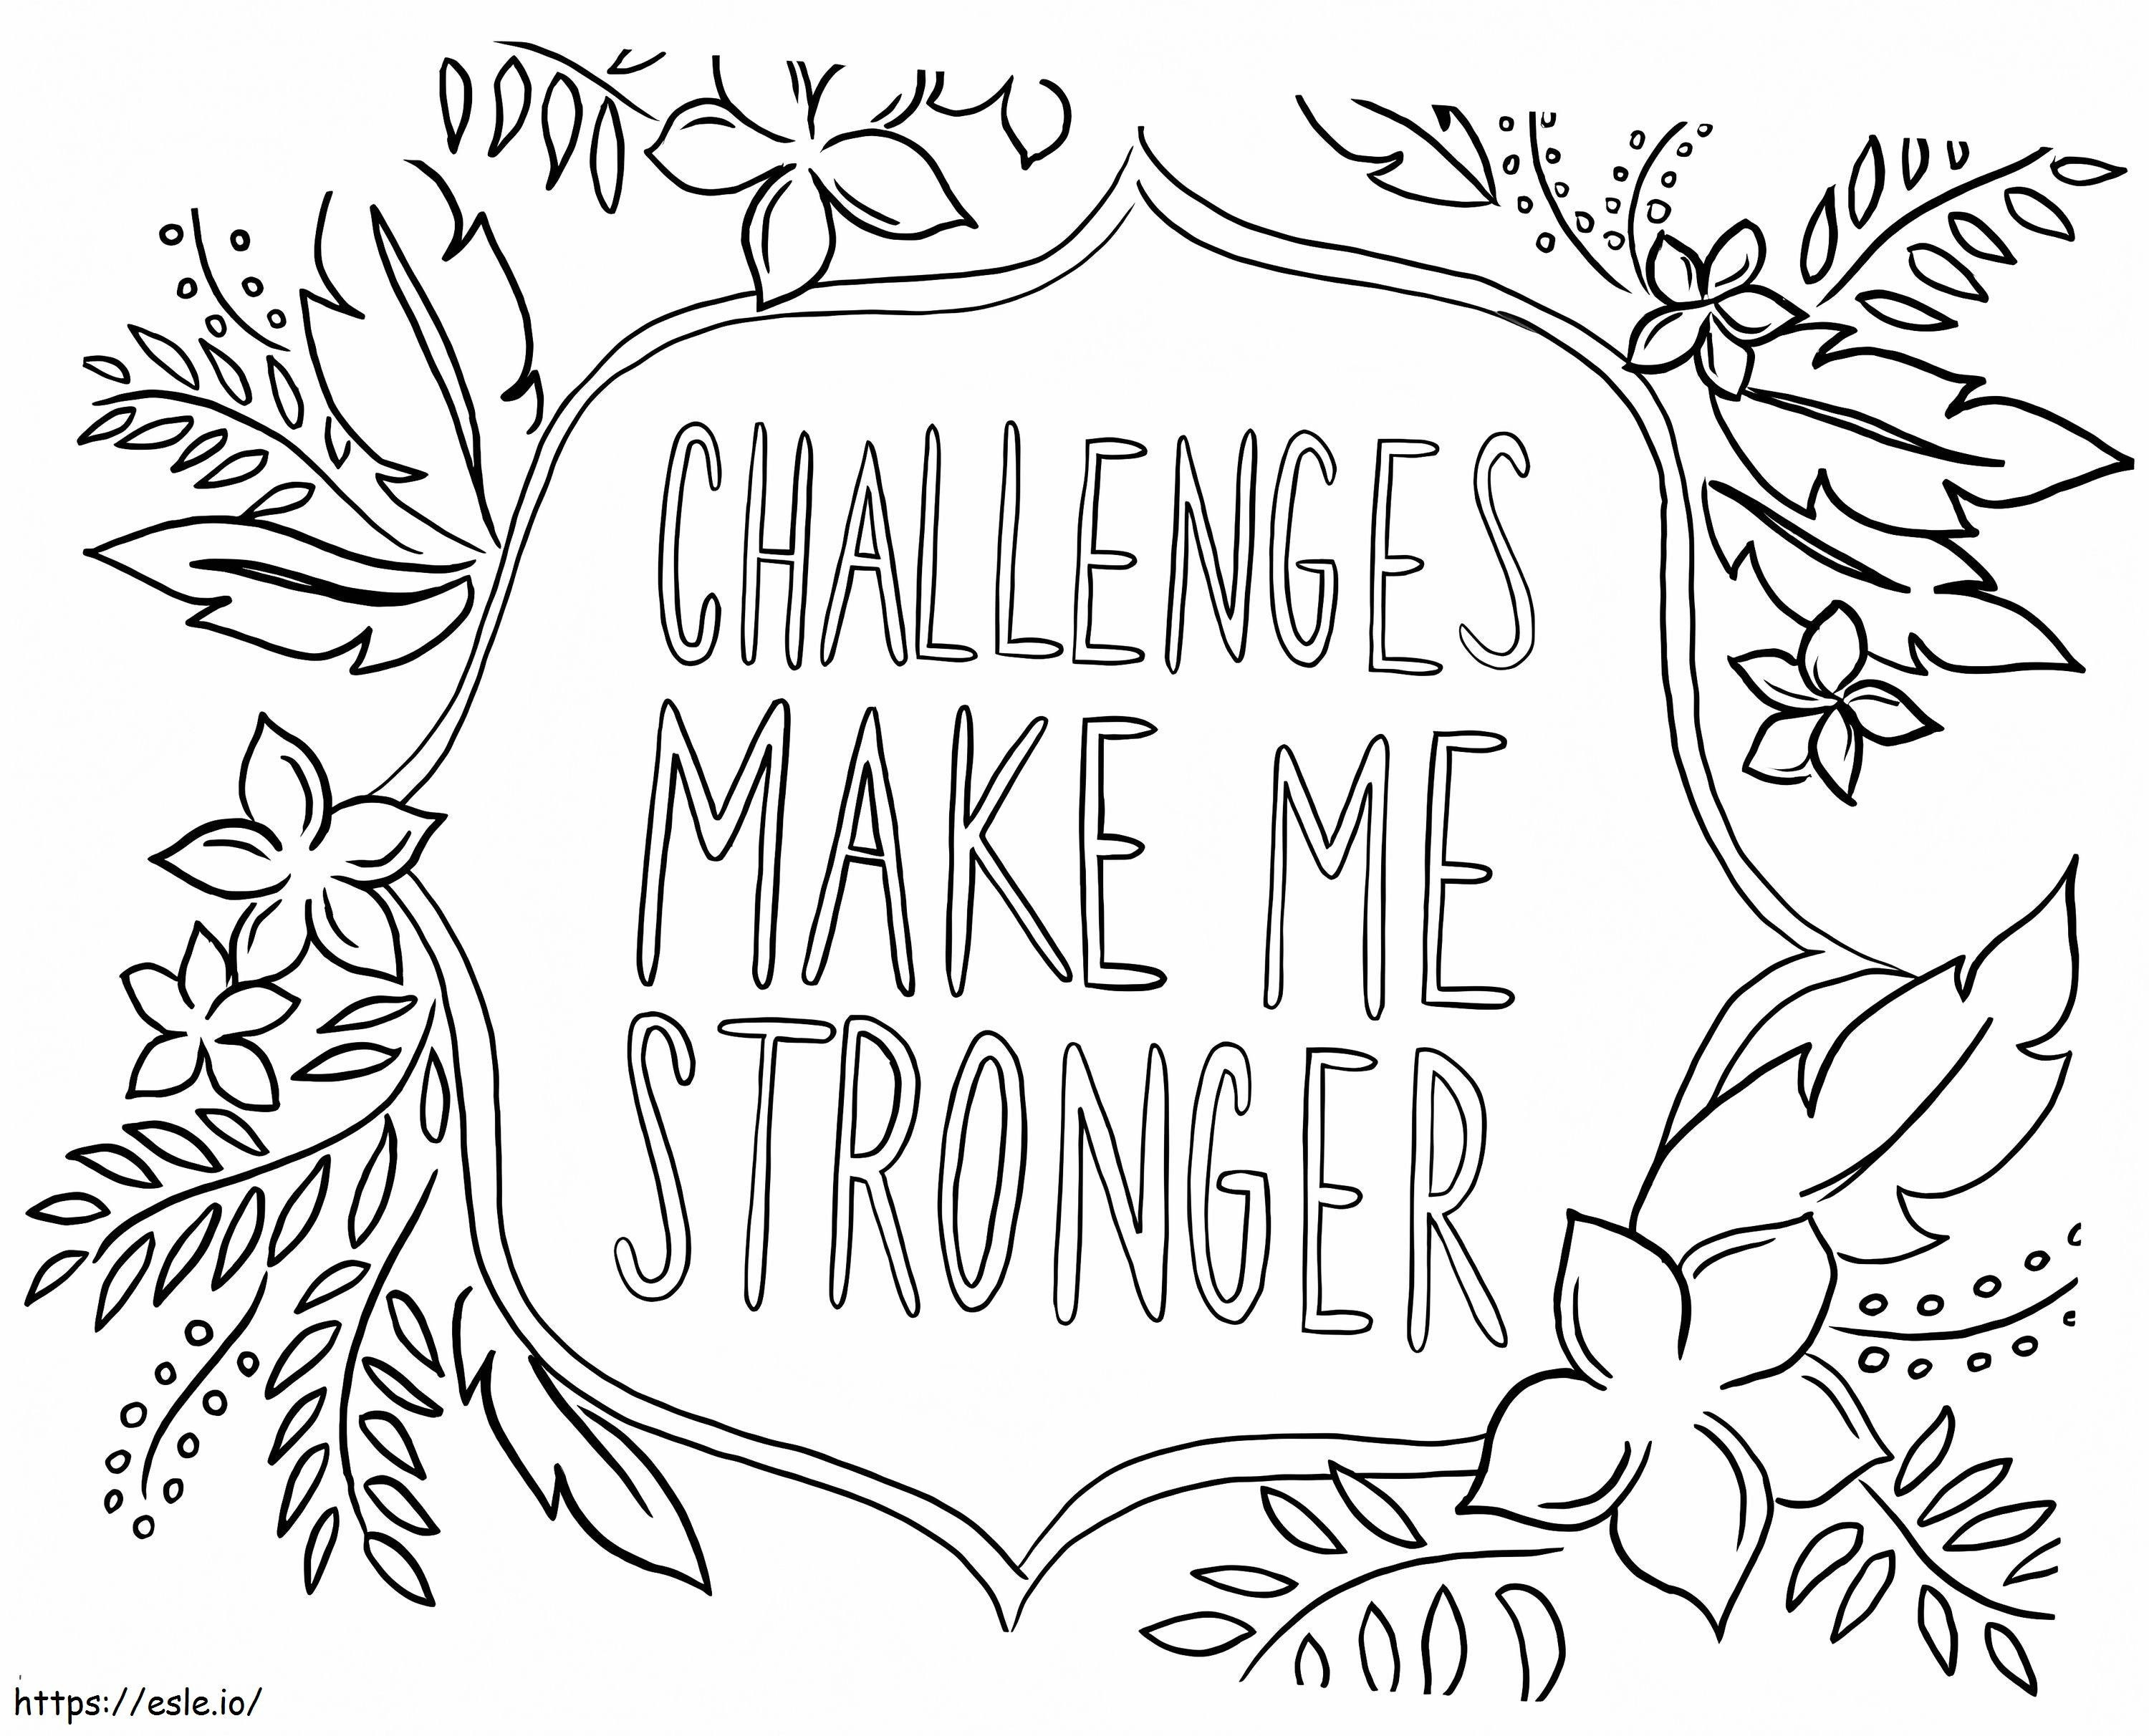 Challenges Make Me Stronger coloring page